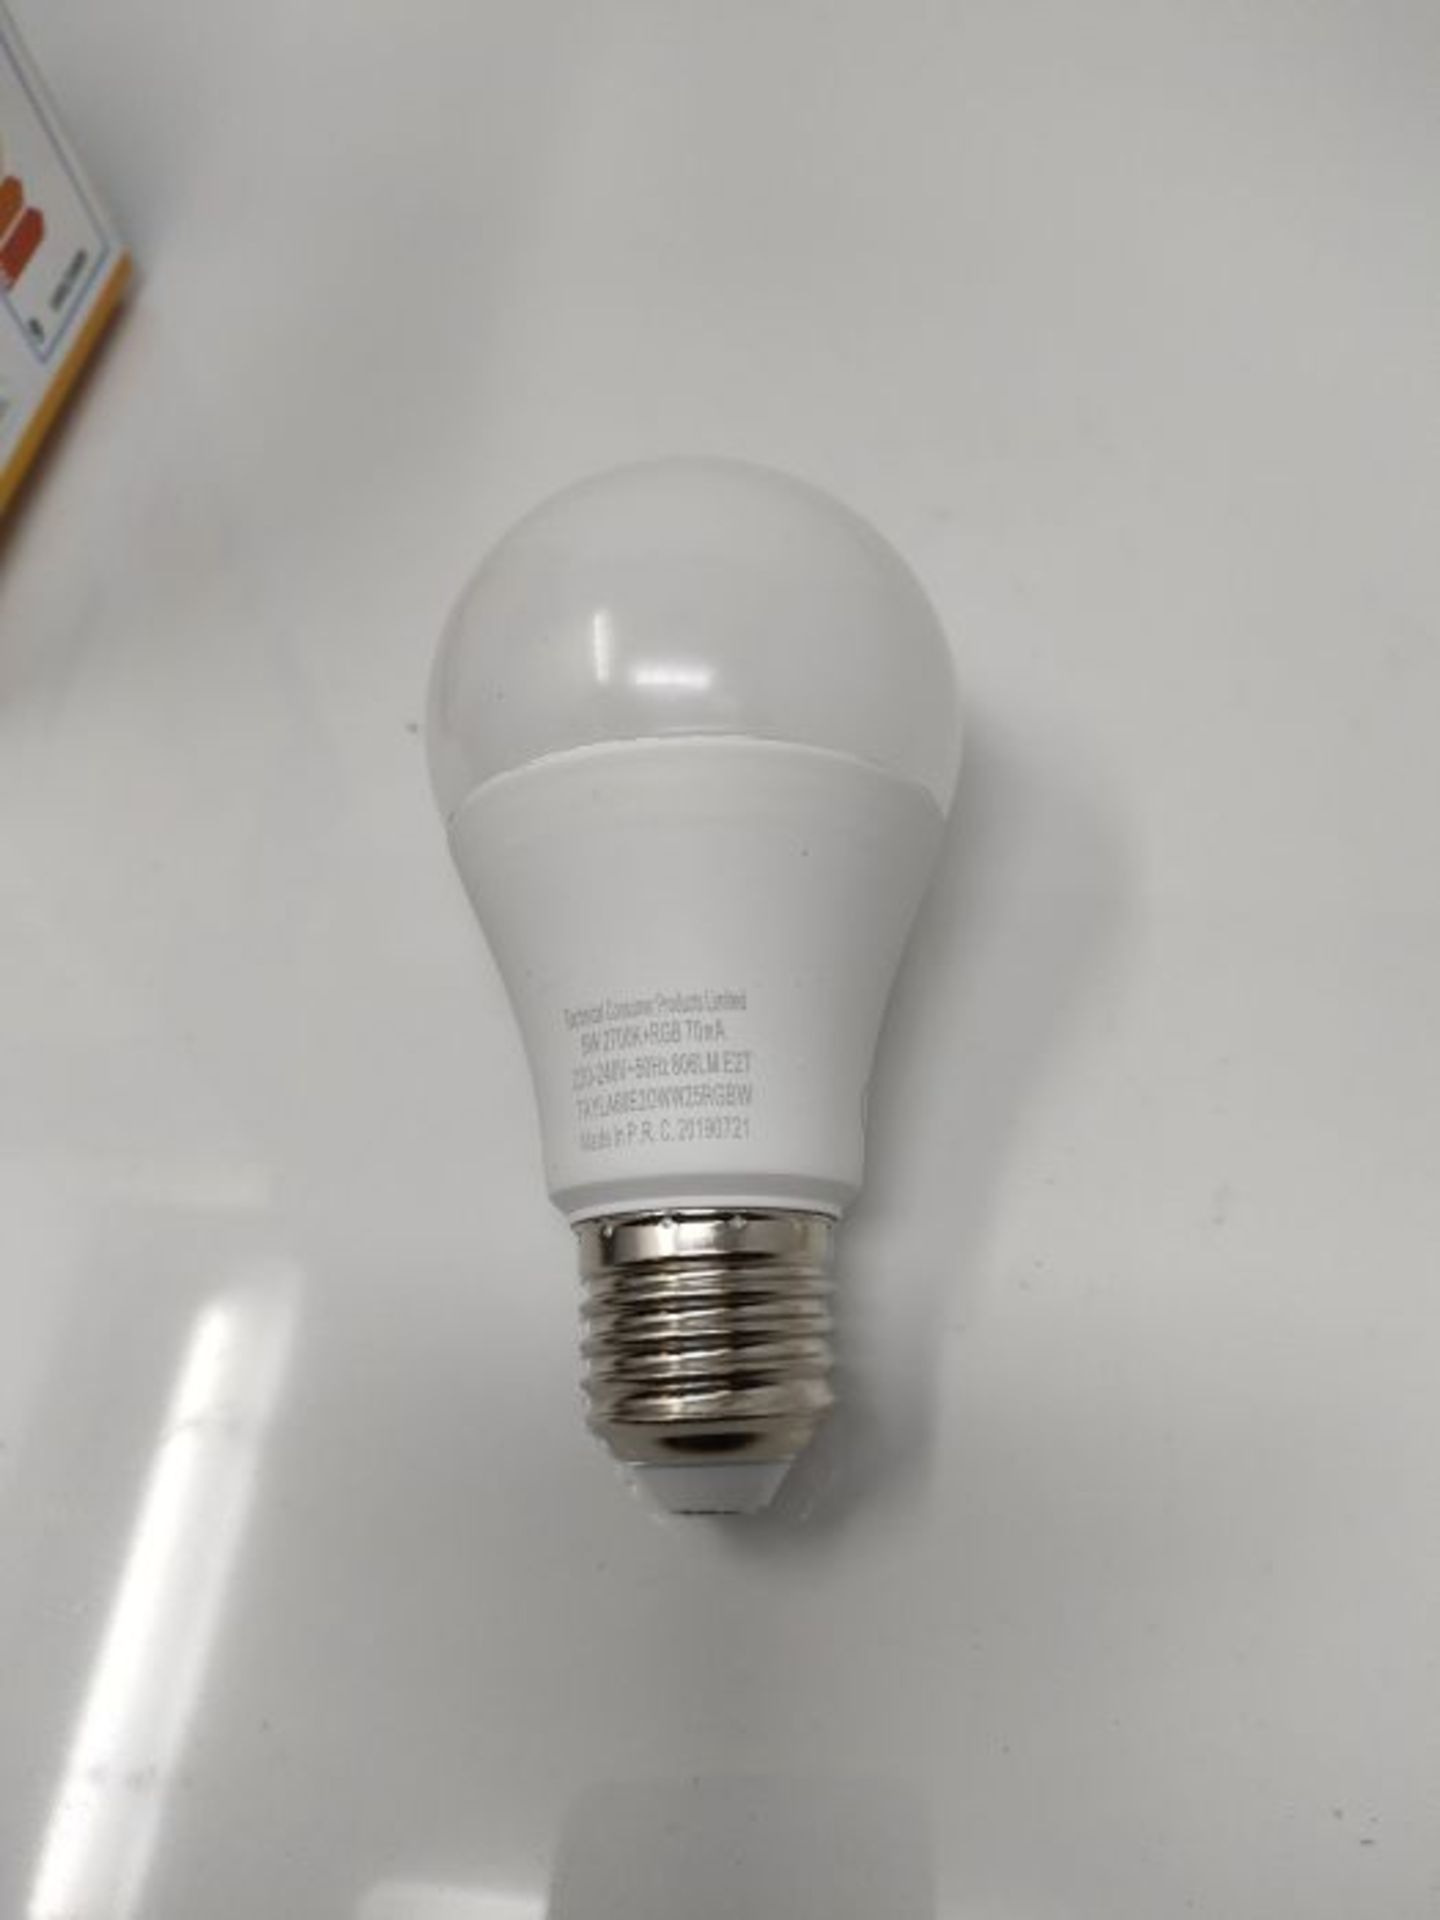 TCP Smart Wi-Fi LED Lightbulb Classic B22 Warm White & Colour Changing Dimmable [Energ - Image 3 of 3